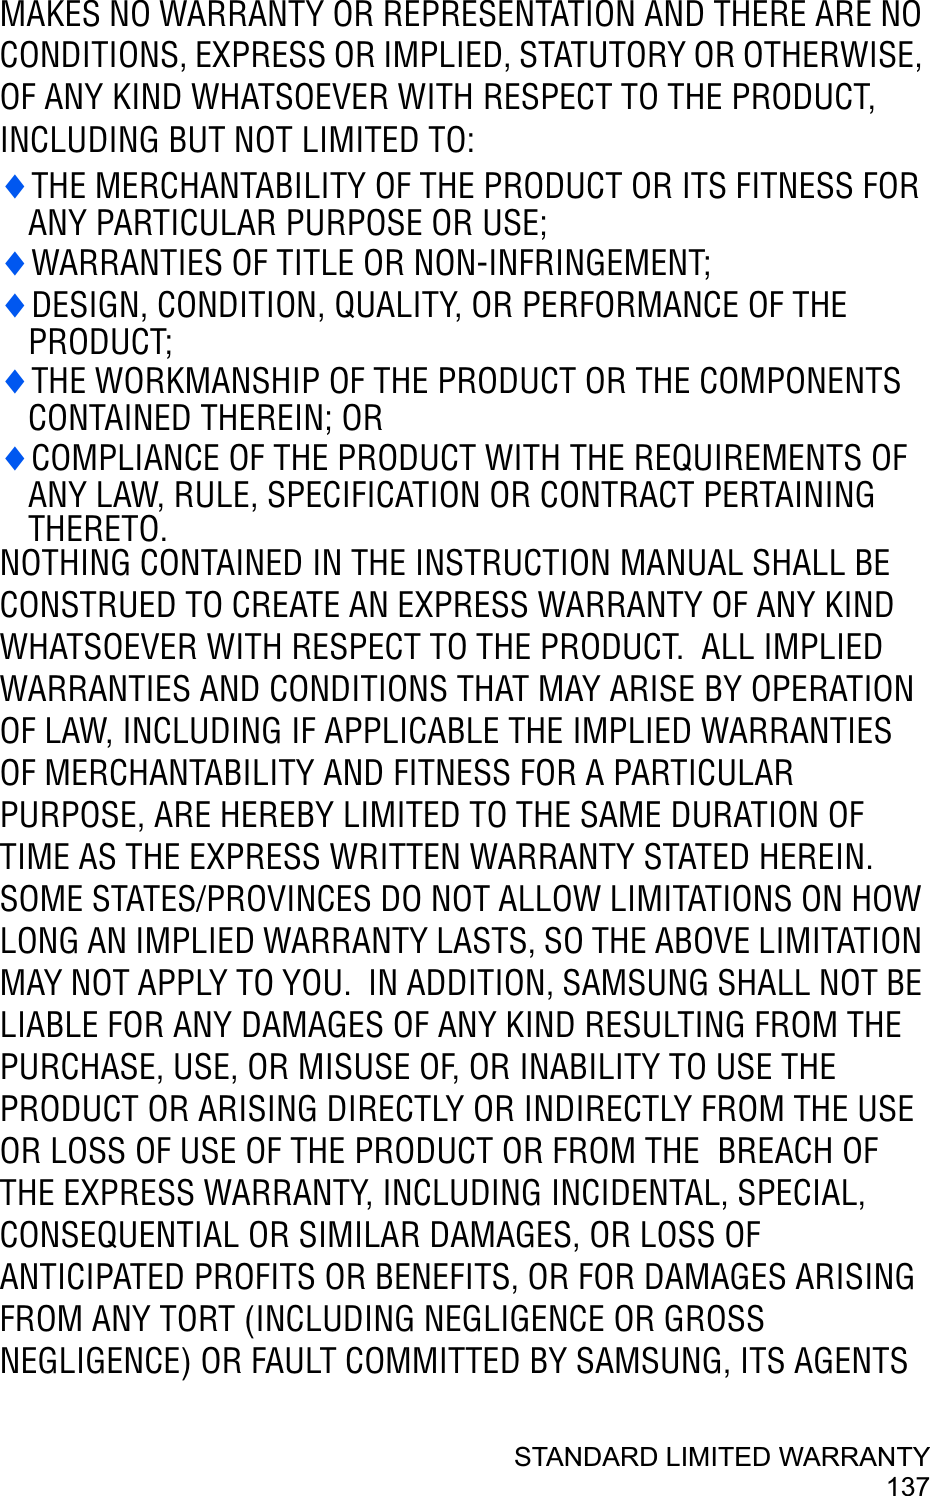 STANDARD LIMITED WARRANTY137MAKES NO WARRANTY OR REPRESENTATION AND THERE ARE NO CONDITIONS, EXPRESS OR IMPLIED, STATUTORY OR OTHERWISE, OF ANY KIND WHATSOEVER WITH RESPECT TO THE PRODUCT, INCLUDING BUT NOT LIMITED TO:iTHE MERCHANTABILITY OF THE PRODUCT OR ITS FITNESS FOR ANY PARTICULAR PURPOSE OR USE;iWARRANTIES OF TITLE OR NON-INFRINGEMENT;iDESIGN, CONDITION, QUALITY, OR PERFORMANCE OF THE PRODUCT;iTHE WORKMANSHIP OF THE PRODUCT OR THE COMPONENTSCONTAINED THEREIN; ORiCOMPLIANCE OF THE PRODUCT WITH THE REQUIREMENTS OF ANY LAW, RULE, SPECIFICATION OR CONTRACT PERTAINING THERETO.NOTHING CONTAINED IN THE INSTRUCTION MANUAL SHALL BE CONSTRUED TO CREATE AN EXPRESS WARRANTY OF ANY KIND WHATSOEVER WITH RESPECT TO THE PRODUCT.  ALL IMPLIED WARRANTIES AND CONDITIONS THAT MAY ARISE BY OPERATION OF LAW, INCLUDING IF APPLICABLE THE IMPLIED WARRANTIES OF MERCHANTABILITY AND FITNESS FOR A PARTICULAR PURPOSE, ARE HEREBY LIMITED TO THE SAME DURATION OF TIME AS THE EXPRESS WRITTEN WARRANTY STATED HEREIN.  SOME STATES/PROVINCES DO NOT ALLOW LIMITATIONS ON HOW LONG AN IMPLIED WARRANTY LASTS, SO THE ABOVE LIMITATION MAY NOT APPLY TO YOU.  IN ADDITION, SAMSUNG SHALL NOT BE LIABLE FOR ANY DAMAGES OF ANY KIND RESULTING FROM THE PURCHASE, USE, OR MISUSE OF, OR INABILITY TO USE THE PRODUCT OR ARISING DIRECTLY OR INDIRECTLY FROM THE USE OR LOSS OF USE OF THE PRODUCT OR FROM THE  BREACH OF THE EXPRESS WARRANTY, INCLUDING INCIDENTAL, SPECIAL, CONSEQUENTIAL OR SIMILAR DAMAGES, OR LOSS OF ANTICIPATED PROFITS OR BENEFITS, OR FOR DAMAGES ARISING FROM ANY TORT (INCLUDING NEGLIGENCE OR GROSS NEGLIGENCE) OR FAULT COMMITTED BY SAMSUNG, ITS AGENTS 